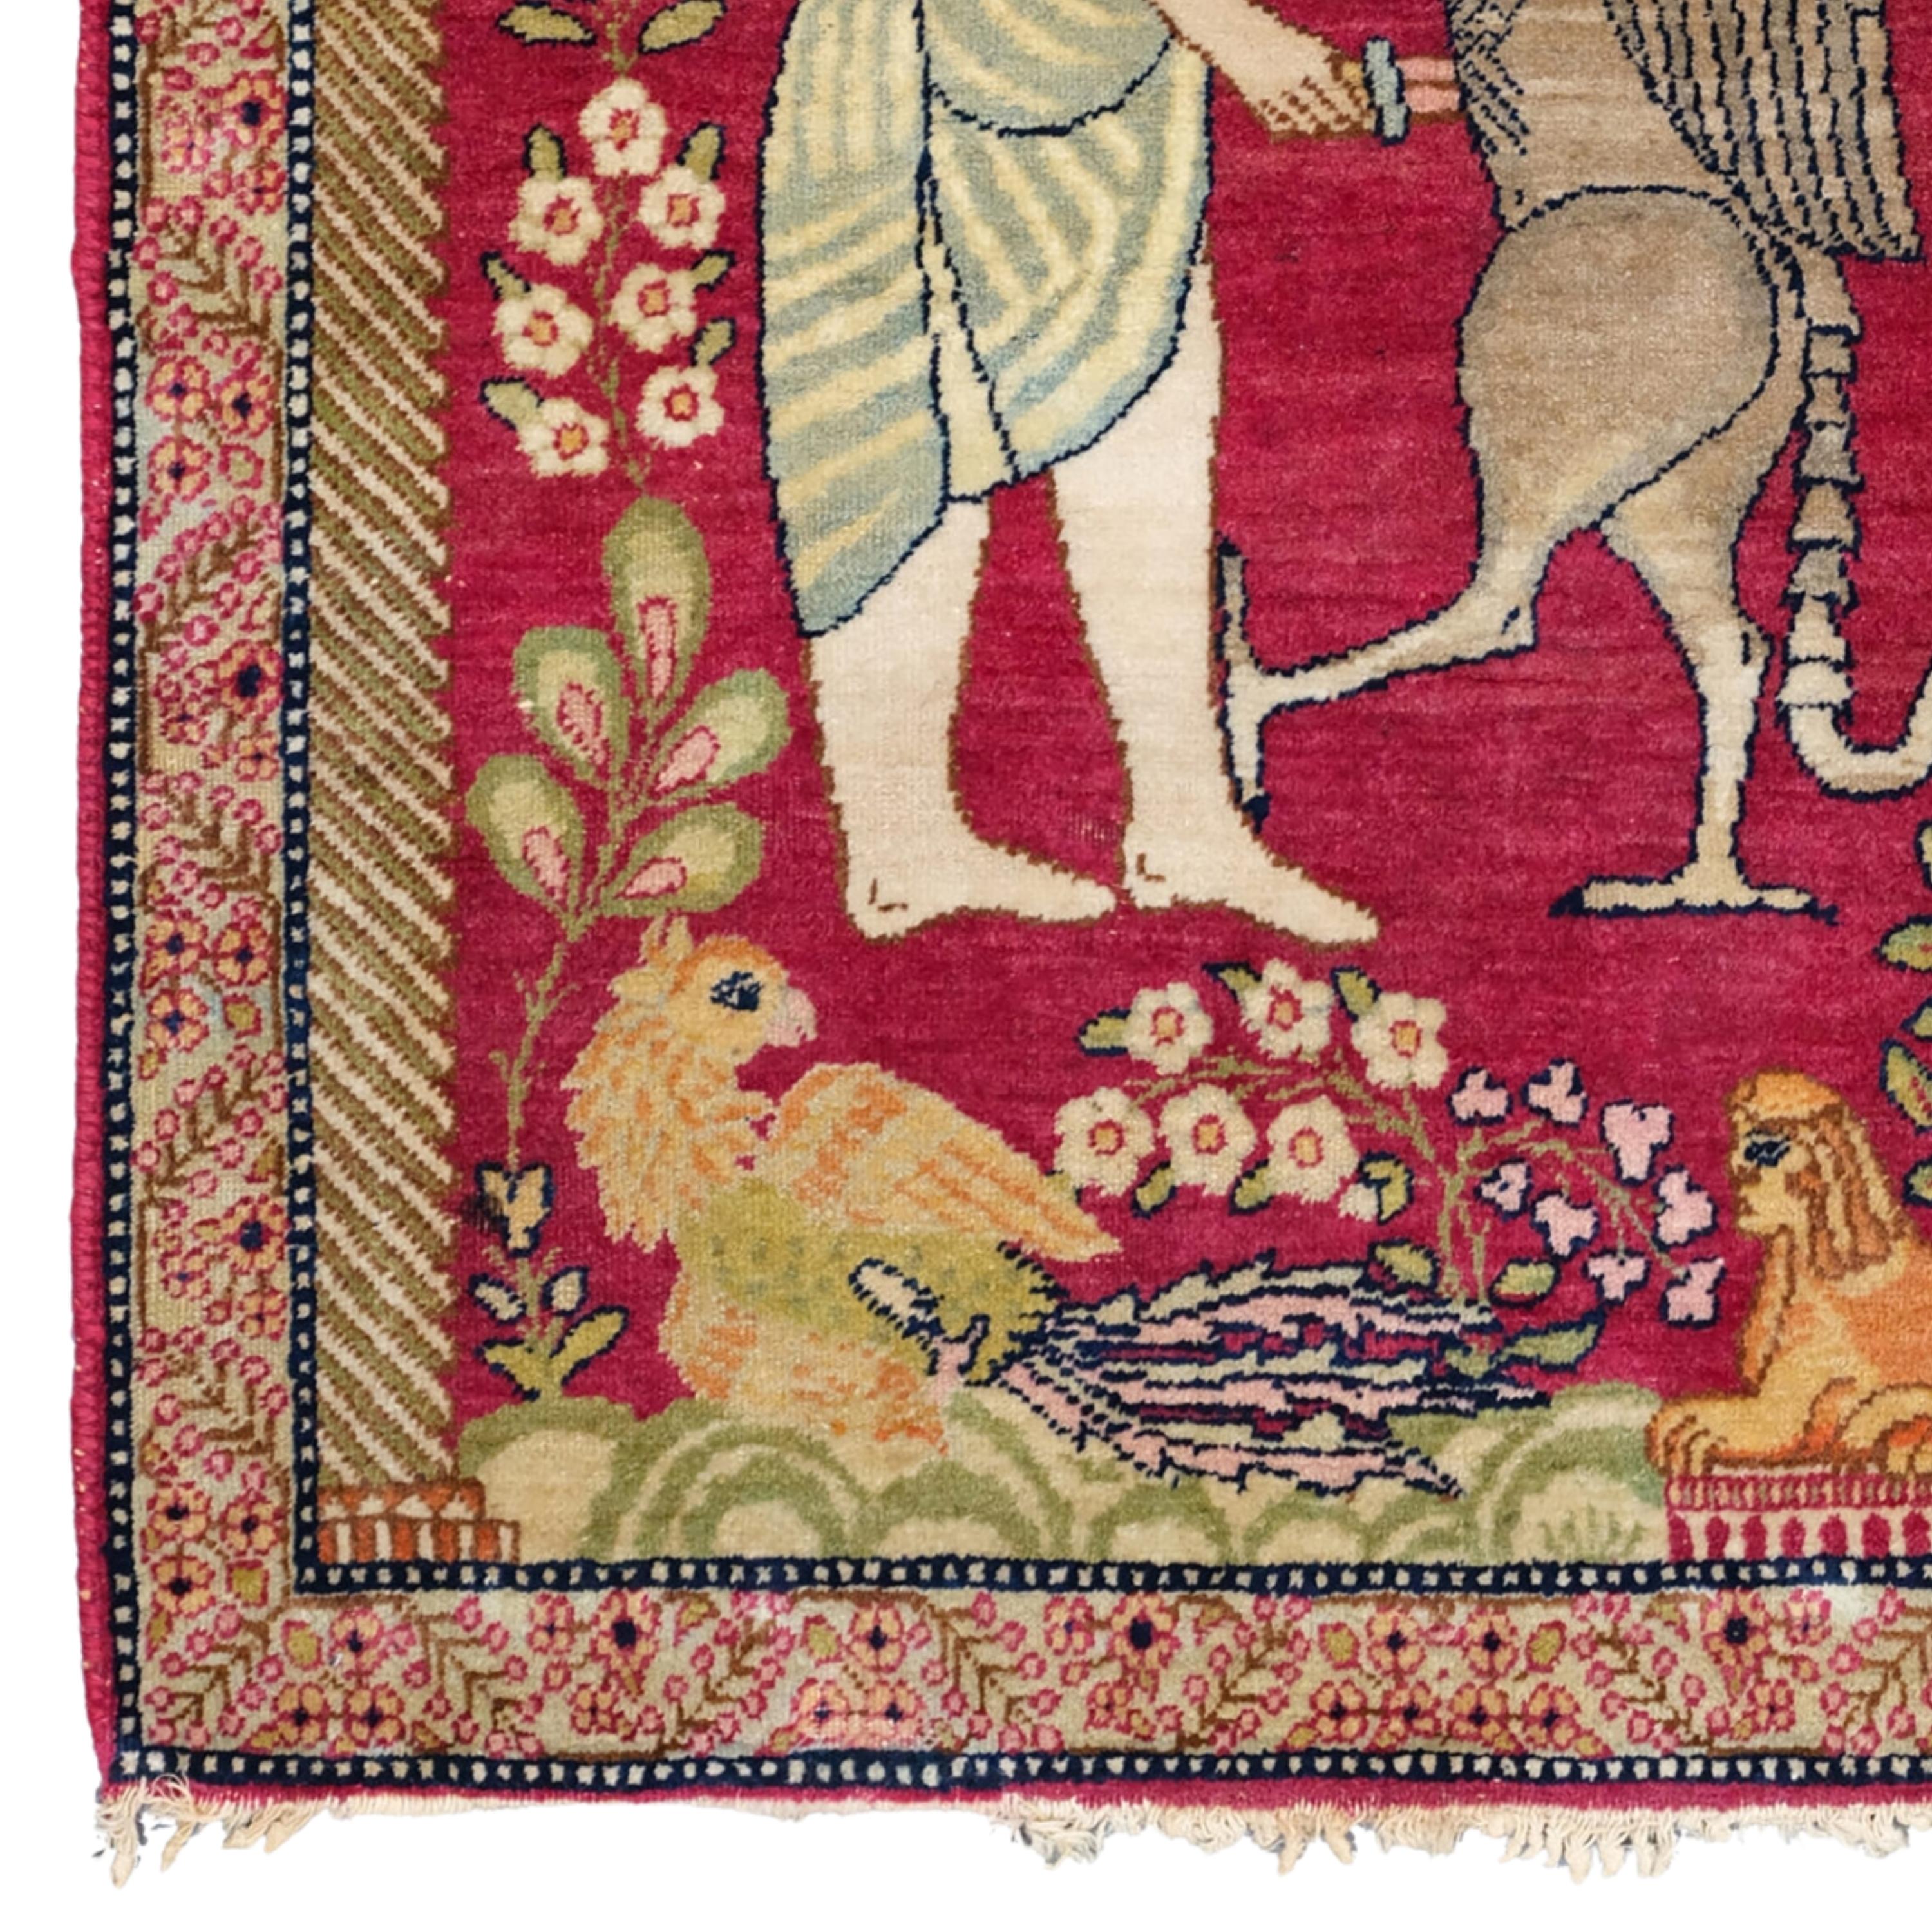 Antique Kerman Pictorial Rug Mythological Tapestry Lion & King Darius Achaemenid at Persepolis

This antique Kerman rug possibly depicting a pictorial scene based on King Darius the Great (Xerxes father) Achaemenid fighting a lion creature of